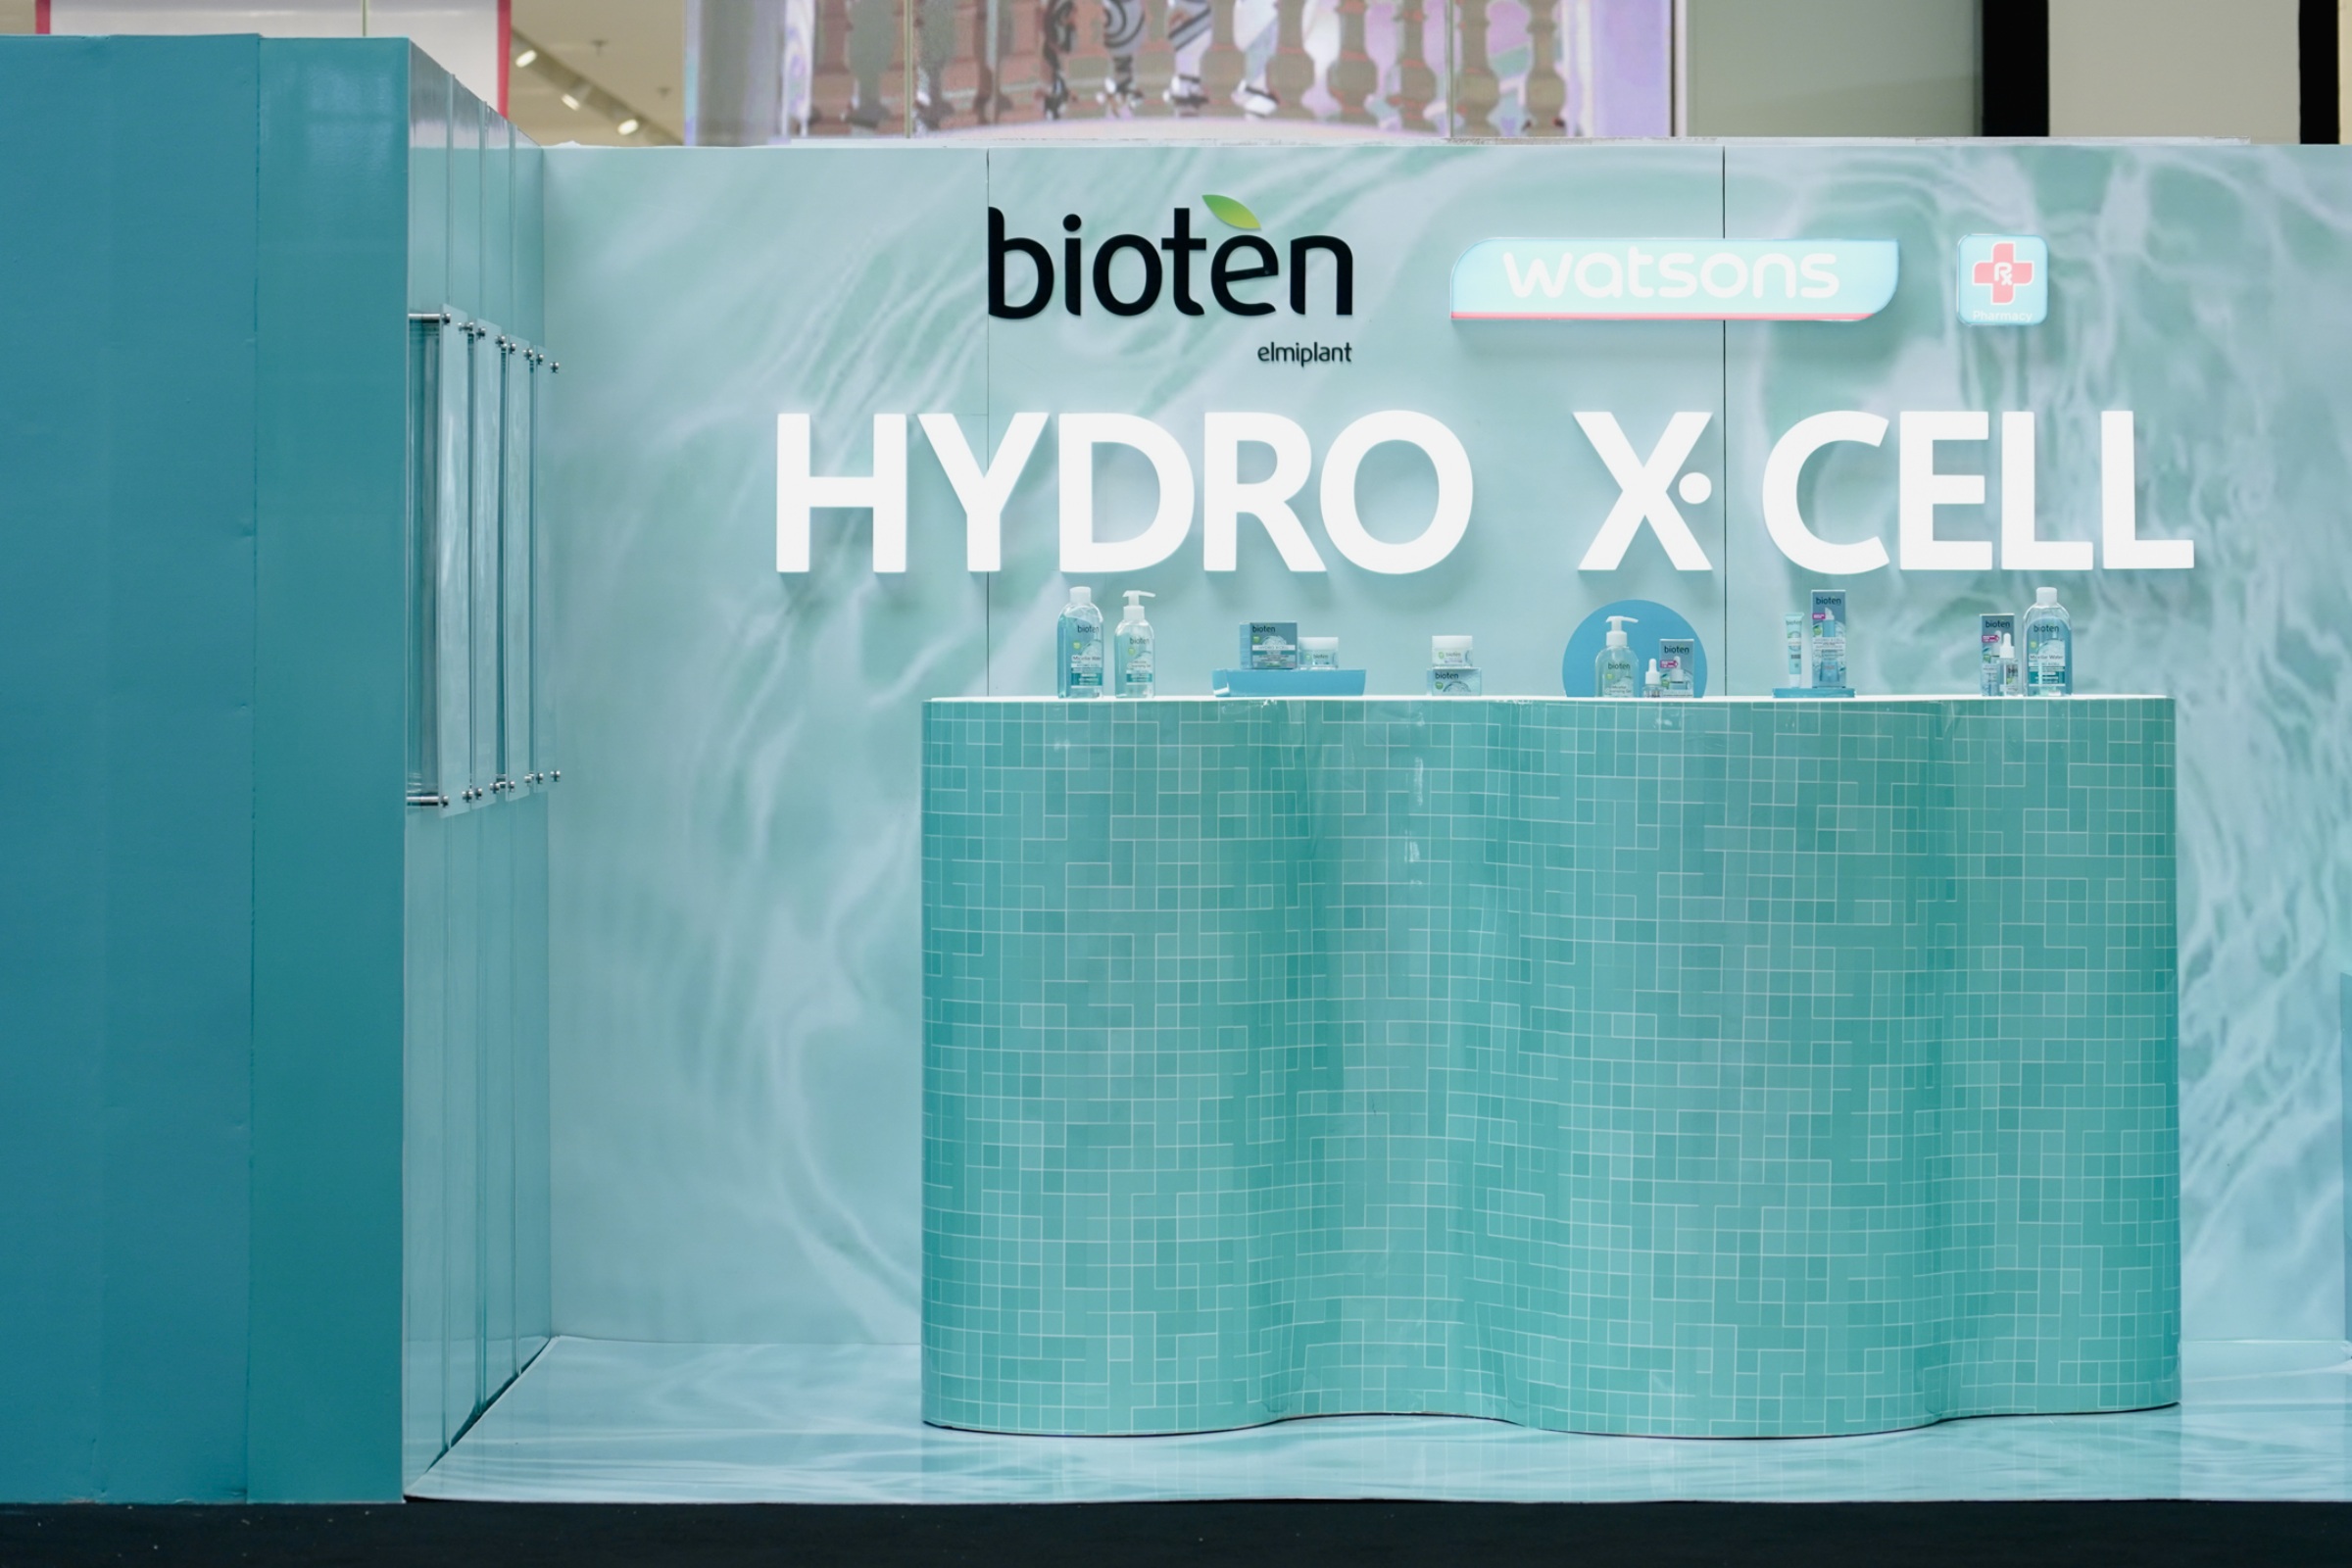 The Hydro X-Cell booth in SM MOA